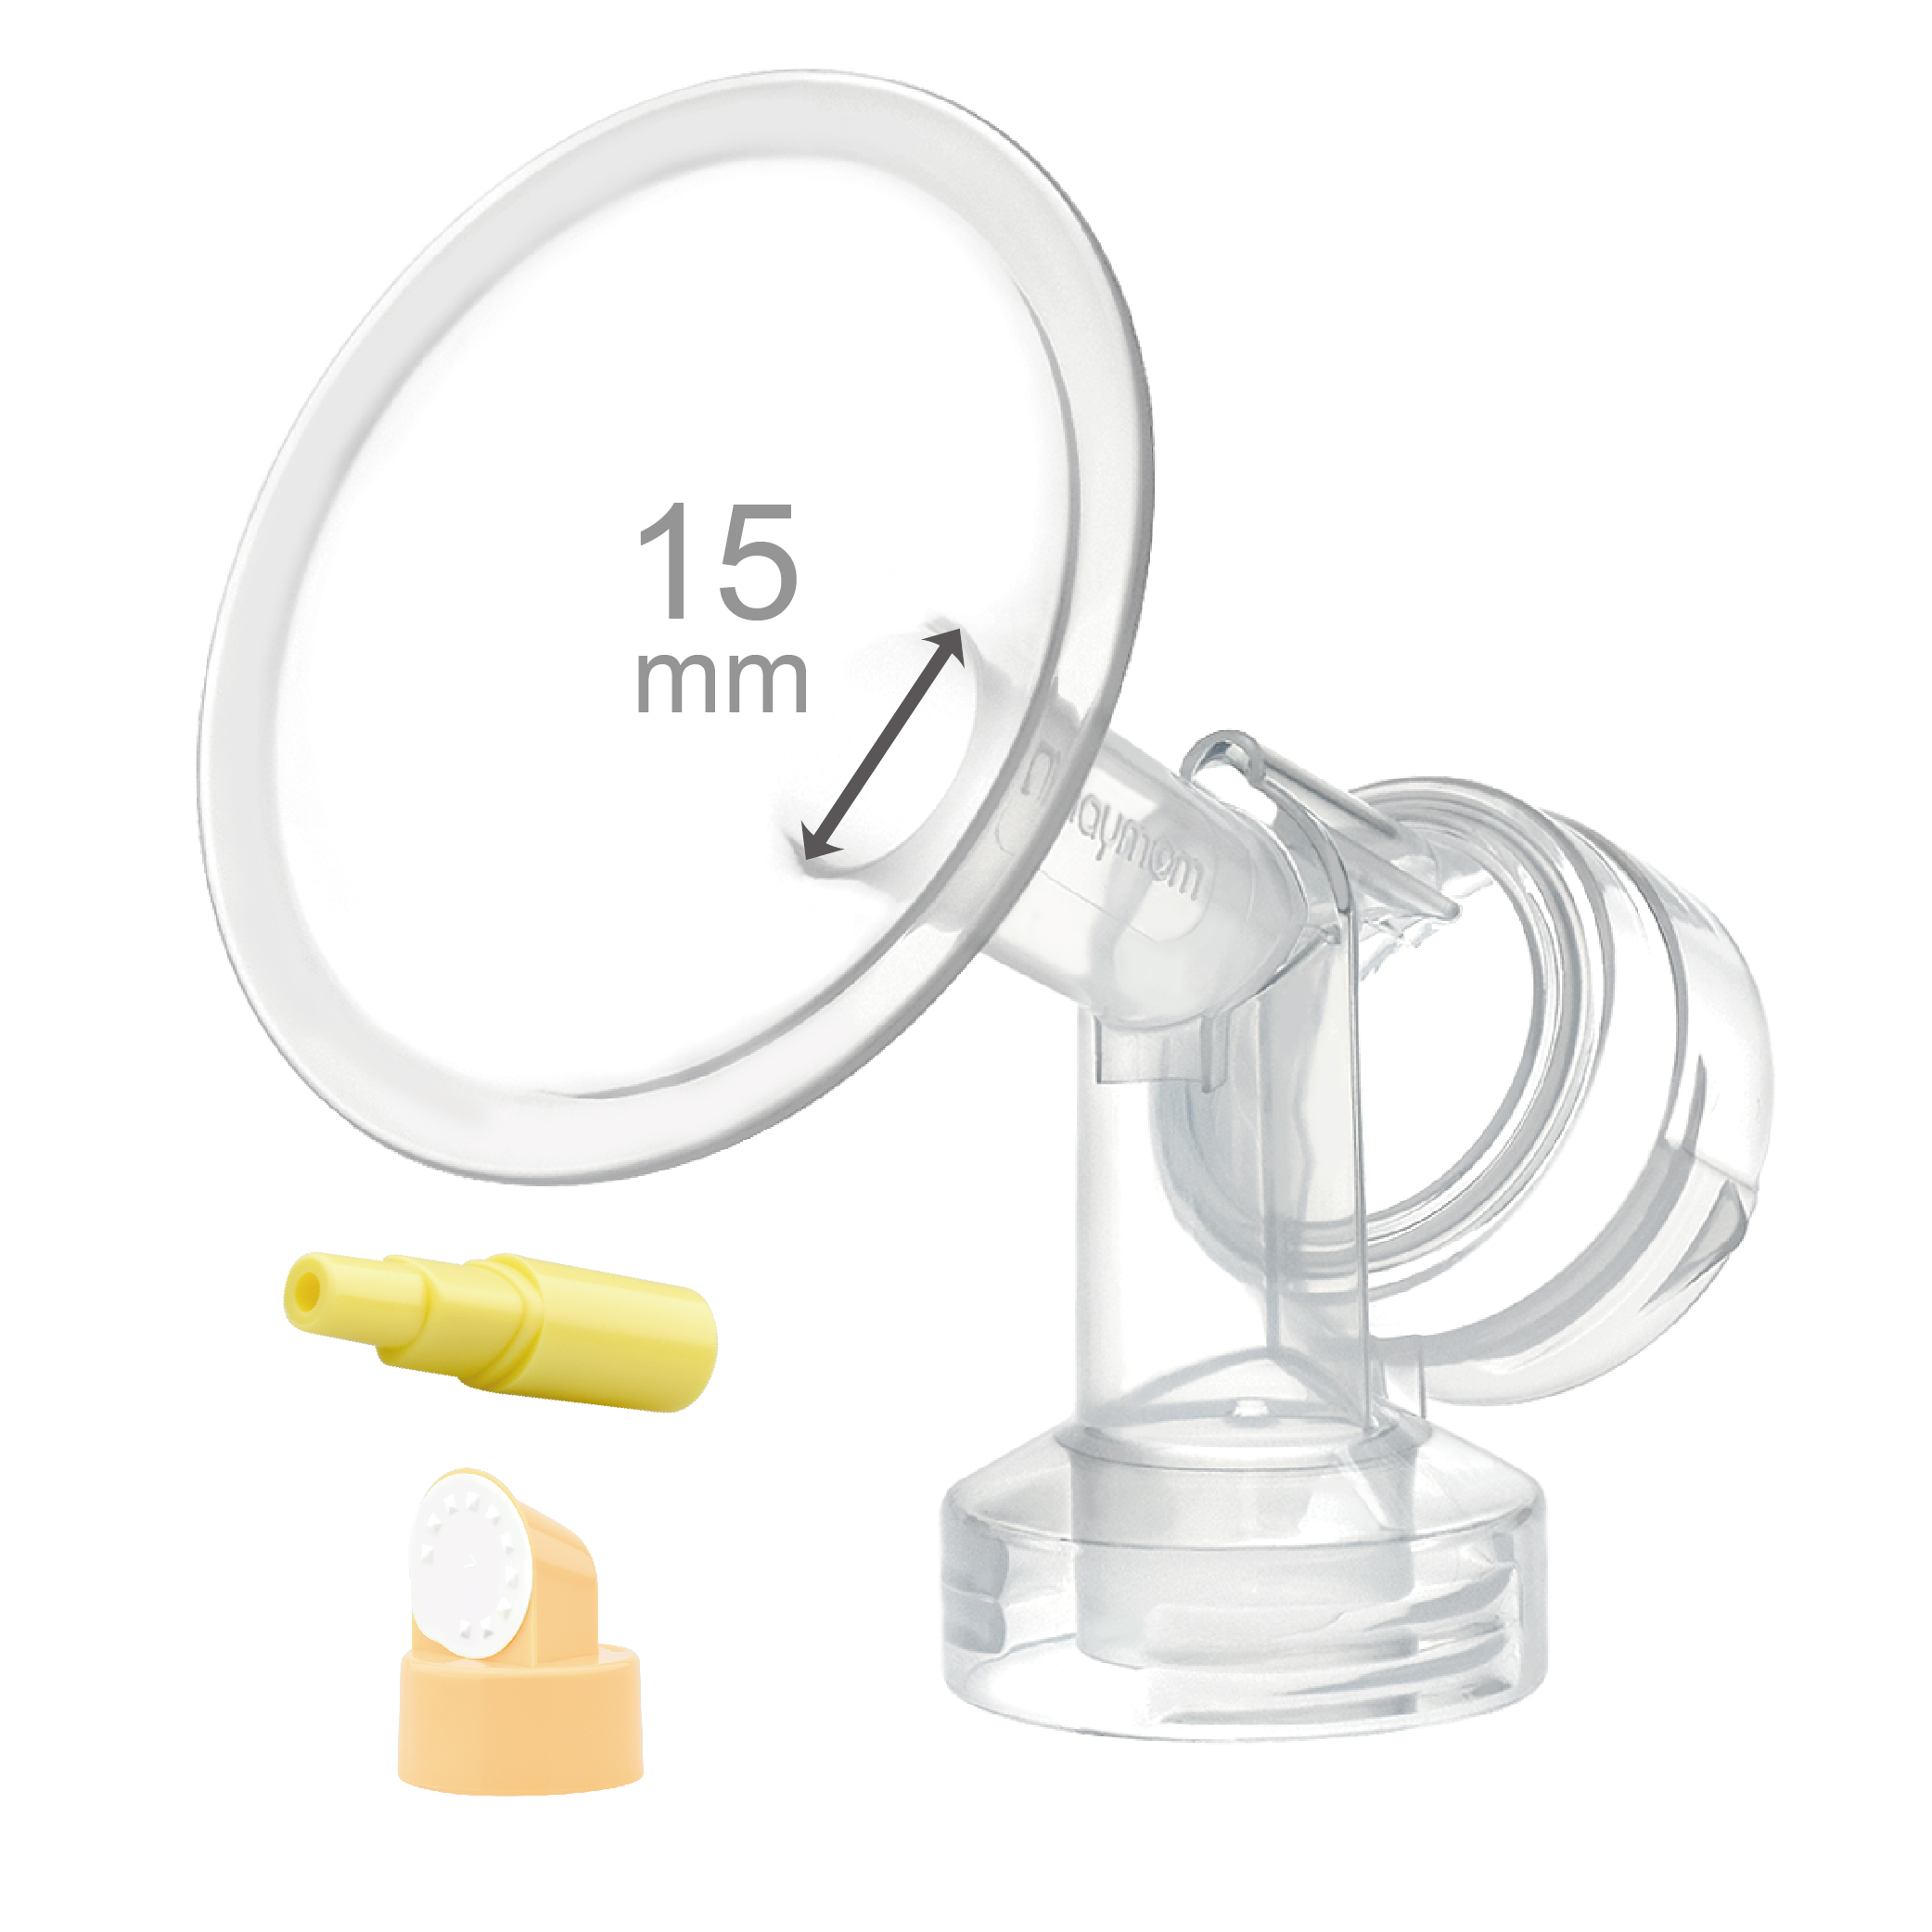 15 mm Extra Small Flange w/ Valve and Membrane for SpeCtra Breast Pumps S1, S2, M1, Spectra 9; Narrow (Standard) Bottle Neck;